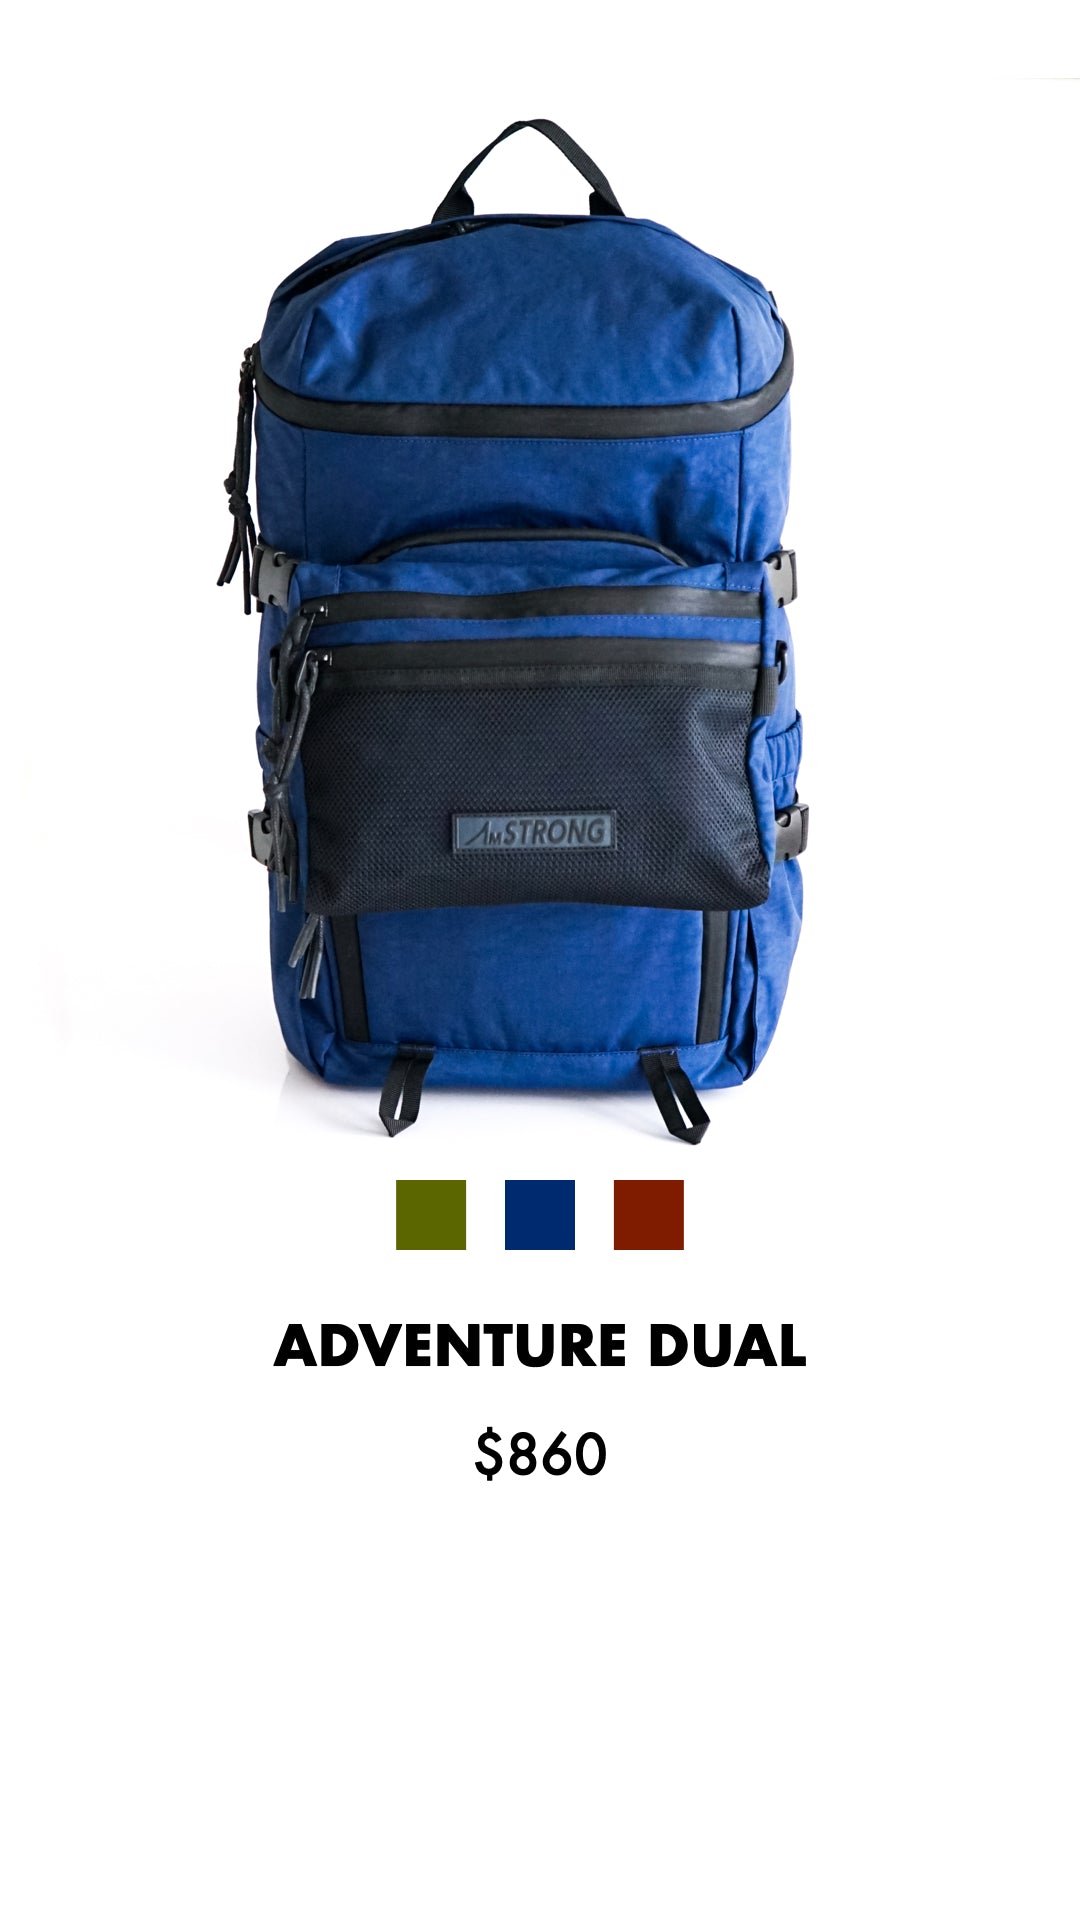 AmSTRONG | ADVENTURE DUAL